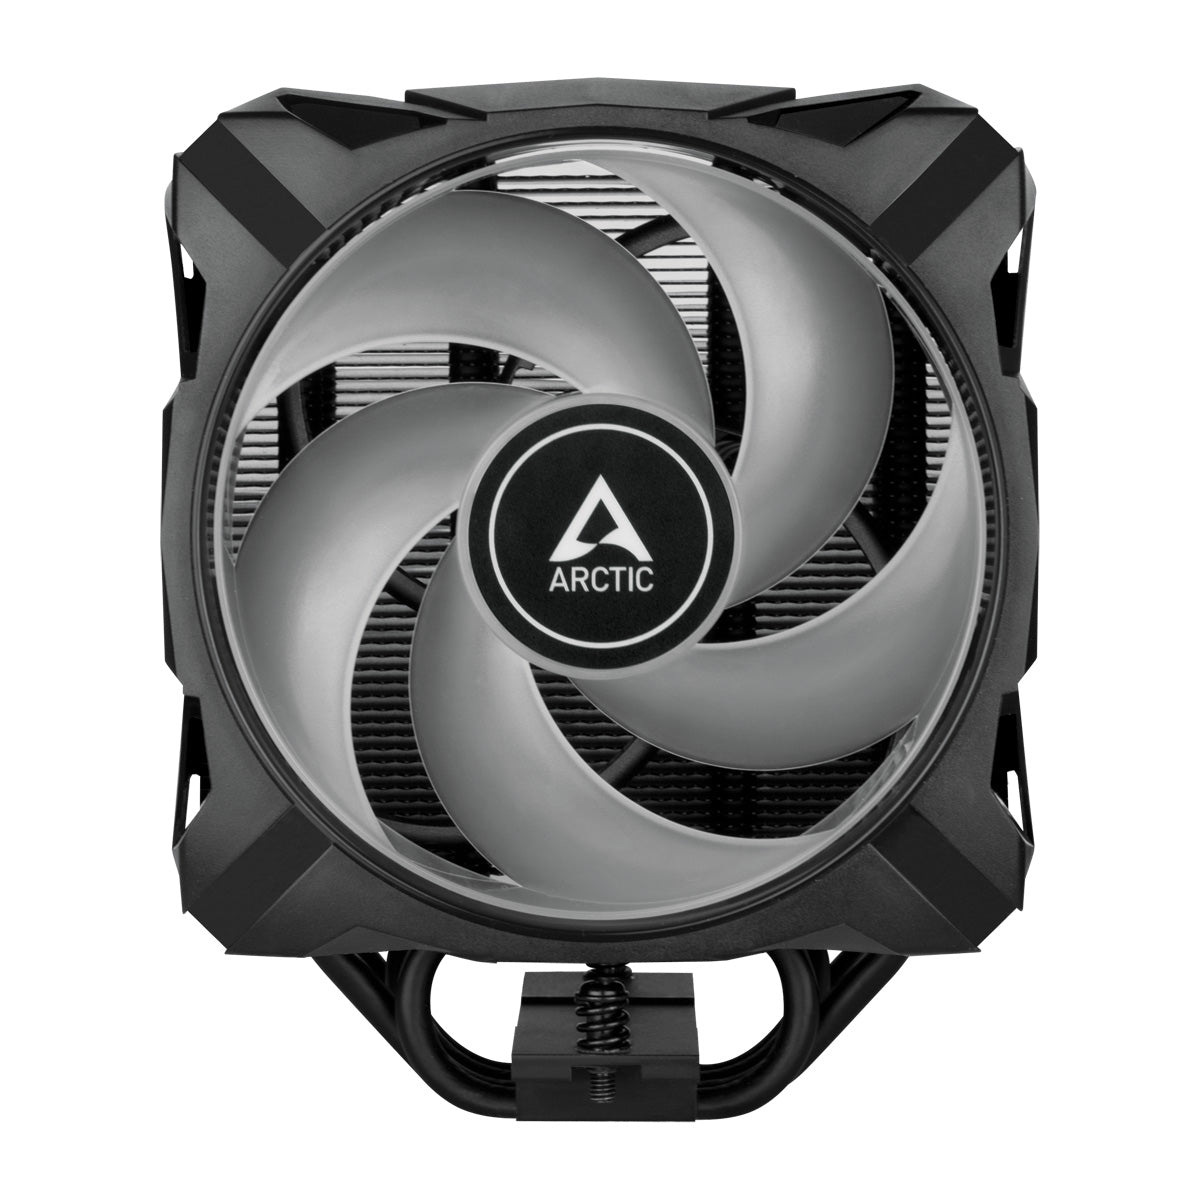 Arctic Freezer A35 A-RGB - Single Tower CPU Cooler with A-RGB, AMD Specific, Pressure Optimized 120 mm P-Fan, 200-1700 RPM, 4 Heat Pipes, incl. MX-5 Thermal Paste (ACFRE00115A)